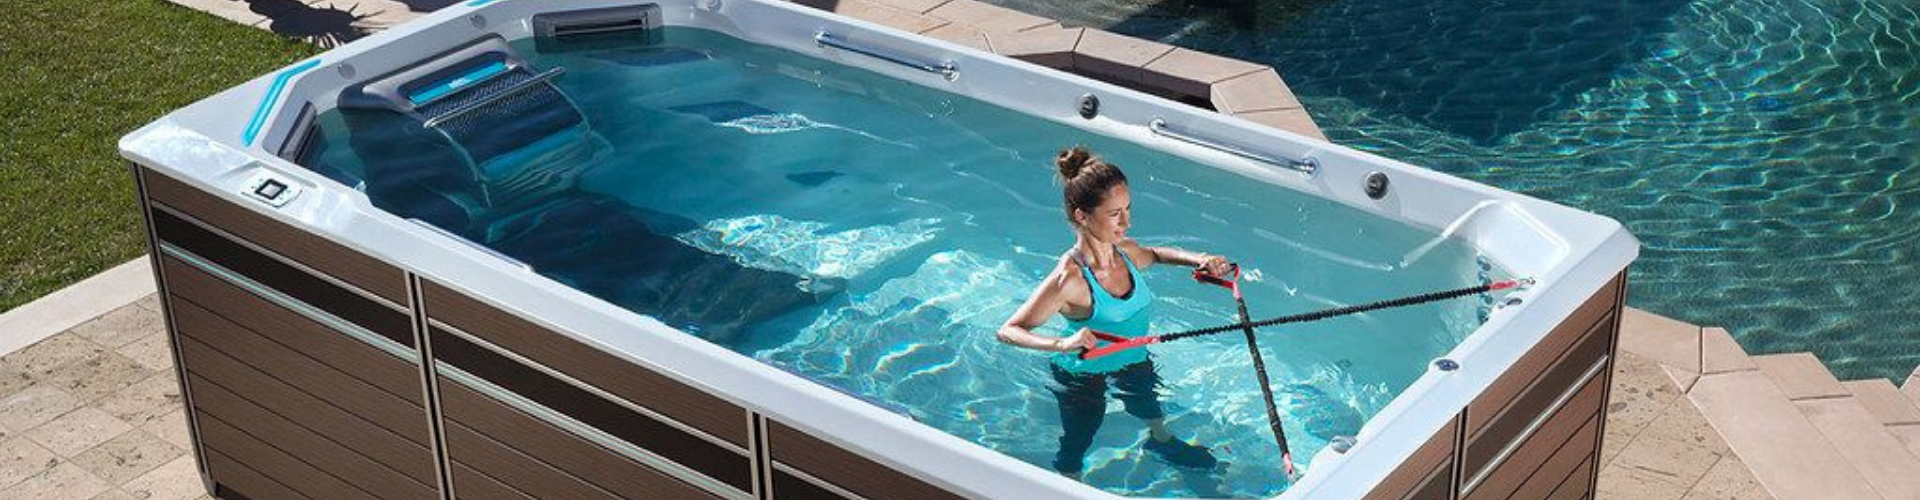 woman using resistance bands in a swim spa